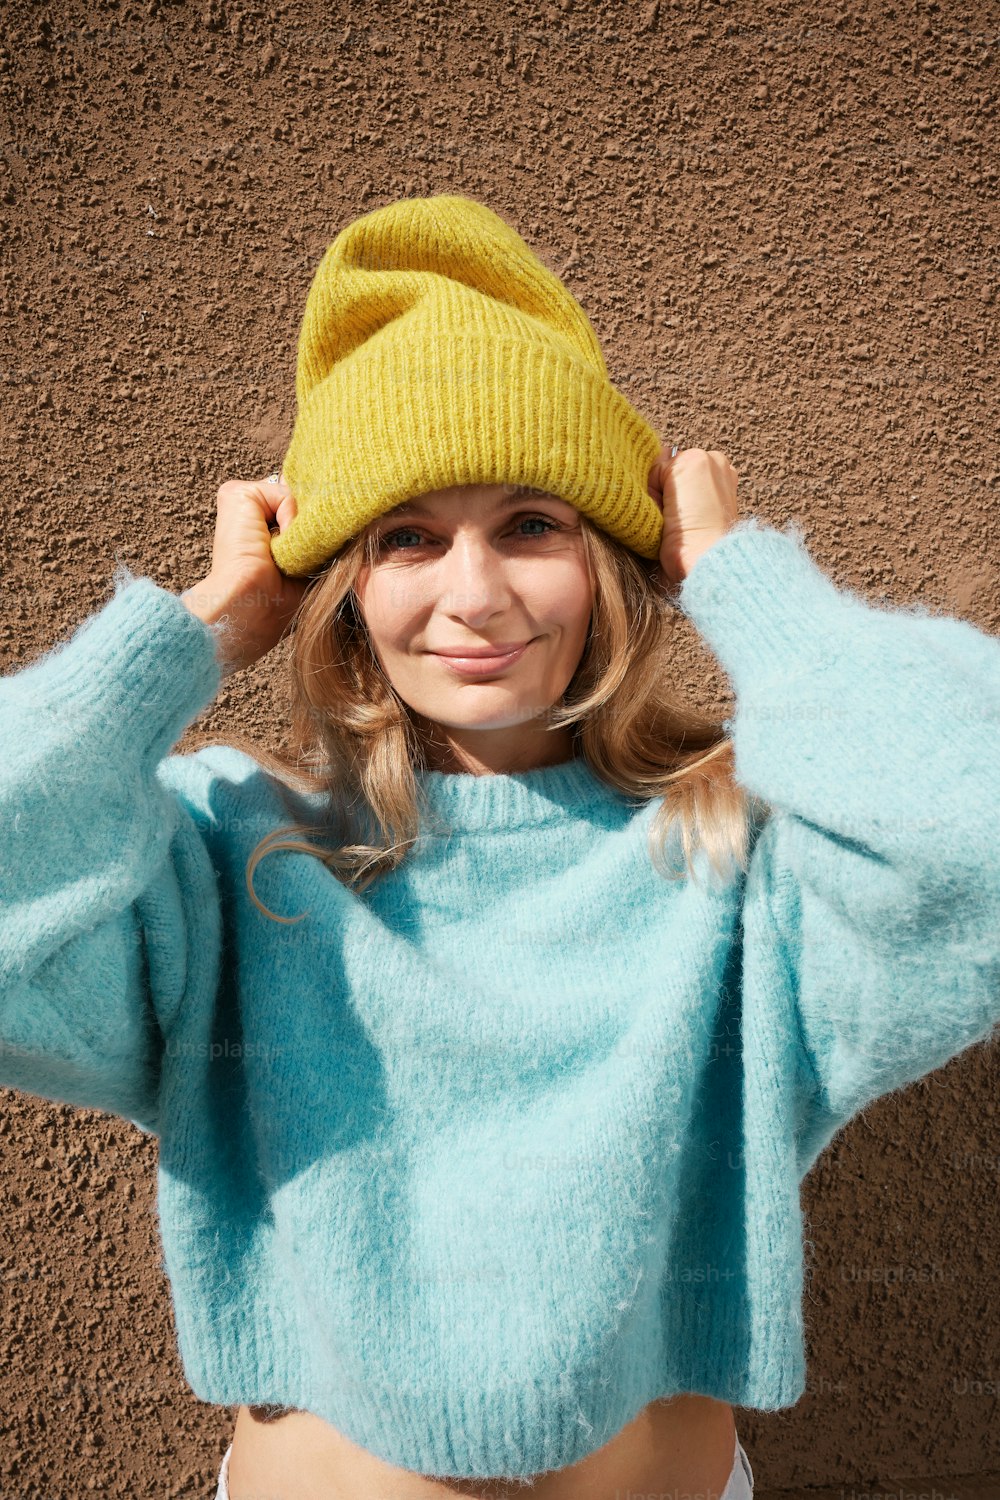 a woman wearing a blue sweater and a yellow hat